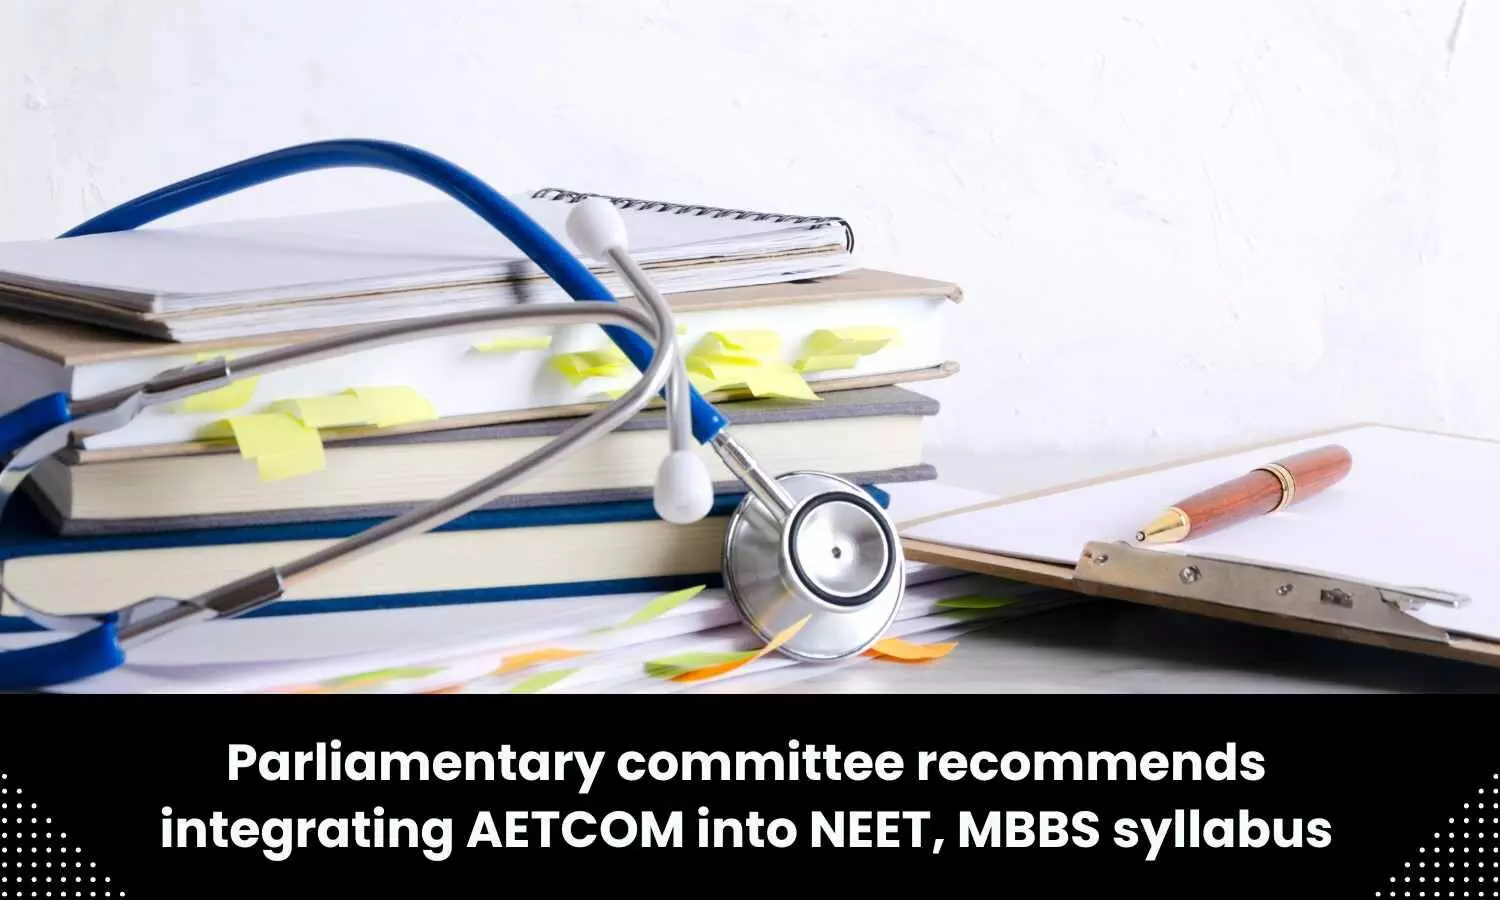 AETCOM module should be part of MBBS curriculum, suggests Parliamentary panel